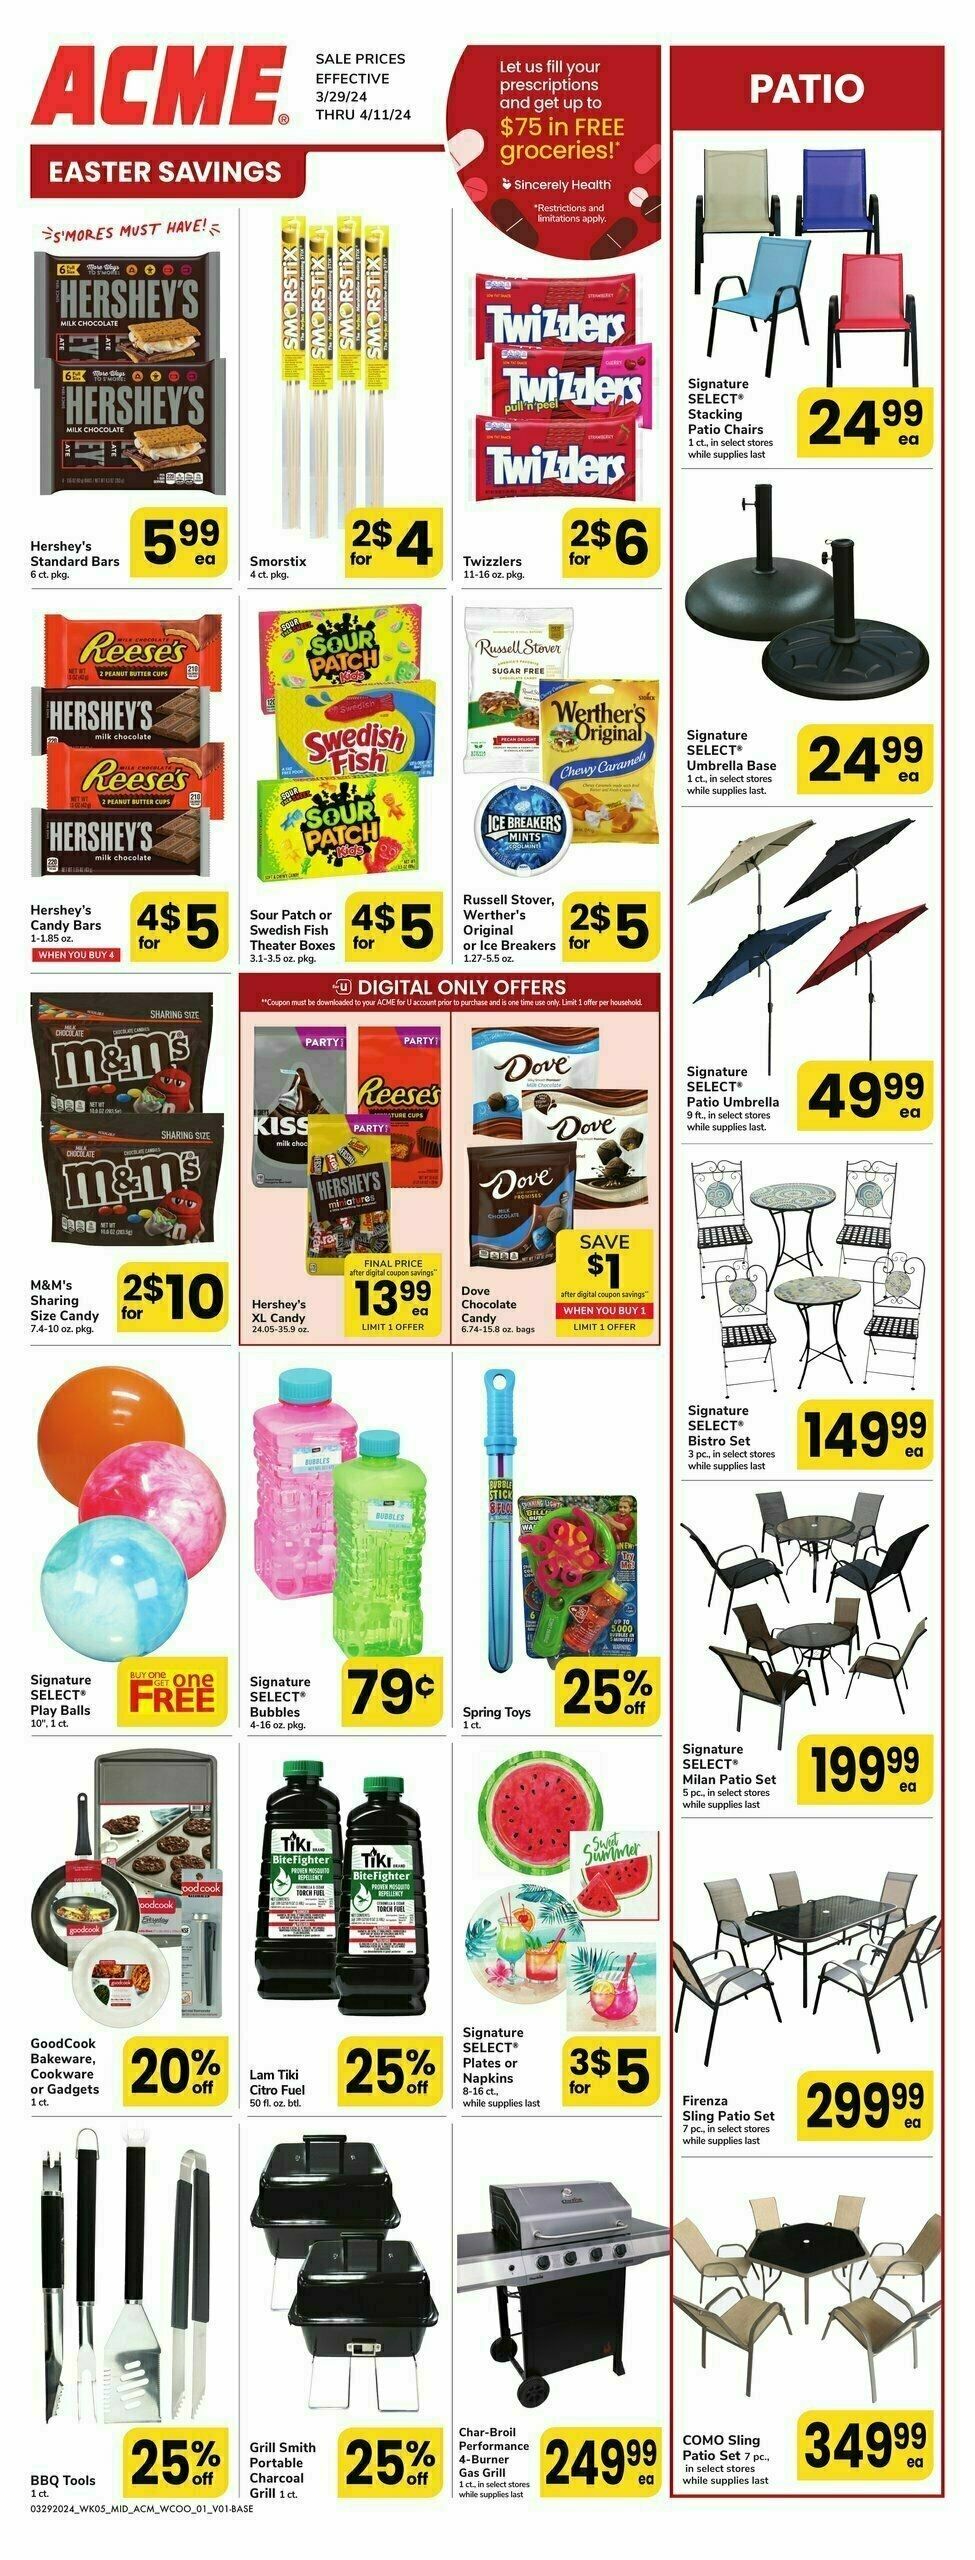 ACME Markets Health, Home & Beauty Weekly Ad from March 29